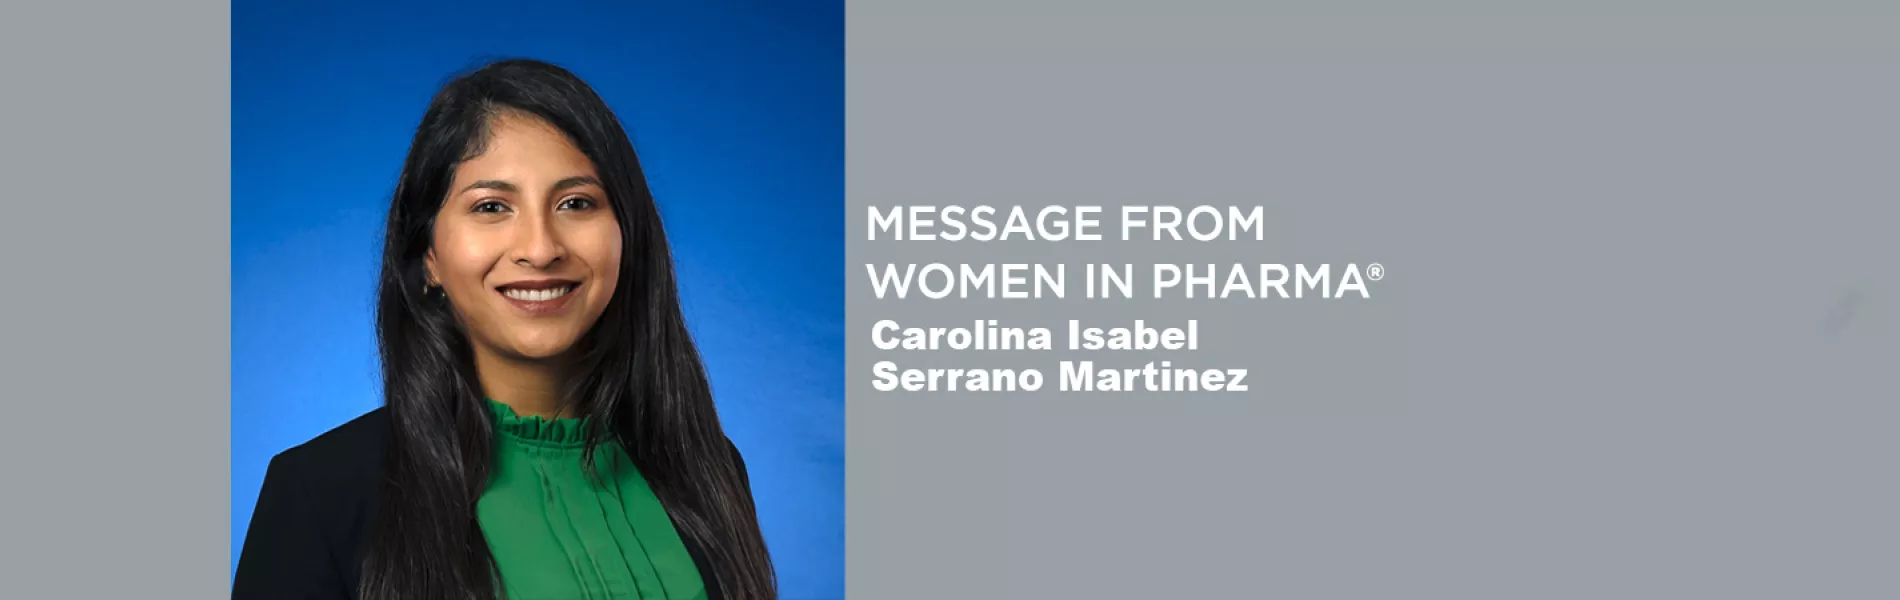 Women in Pharma® Editorial: Mentor ISPE Launches for All Genders